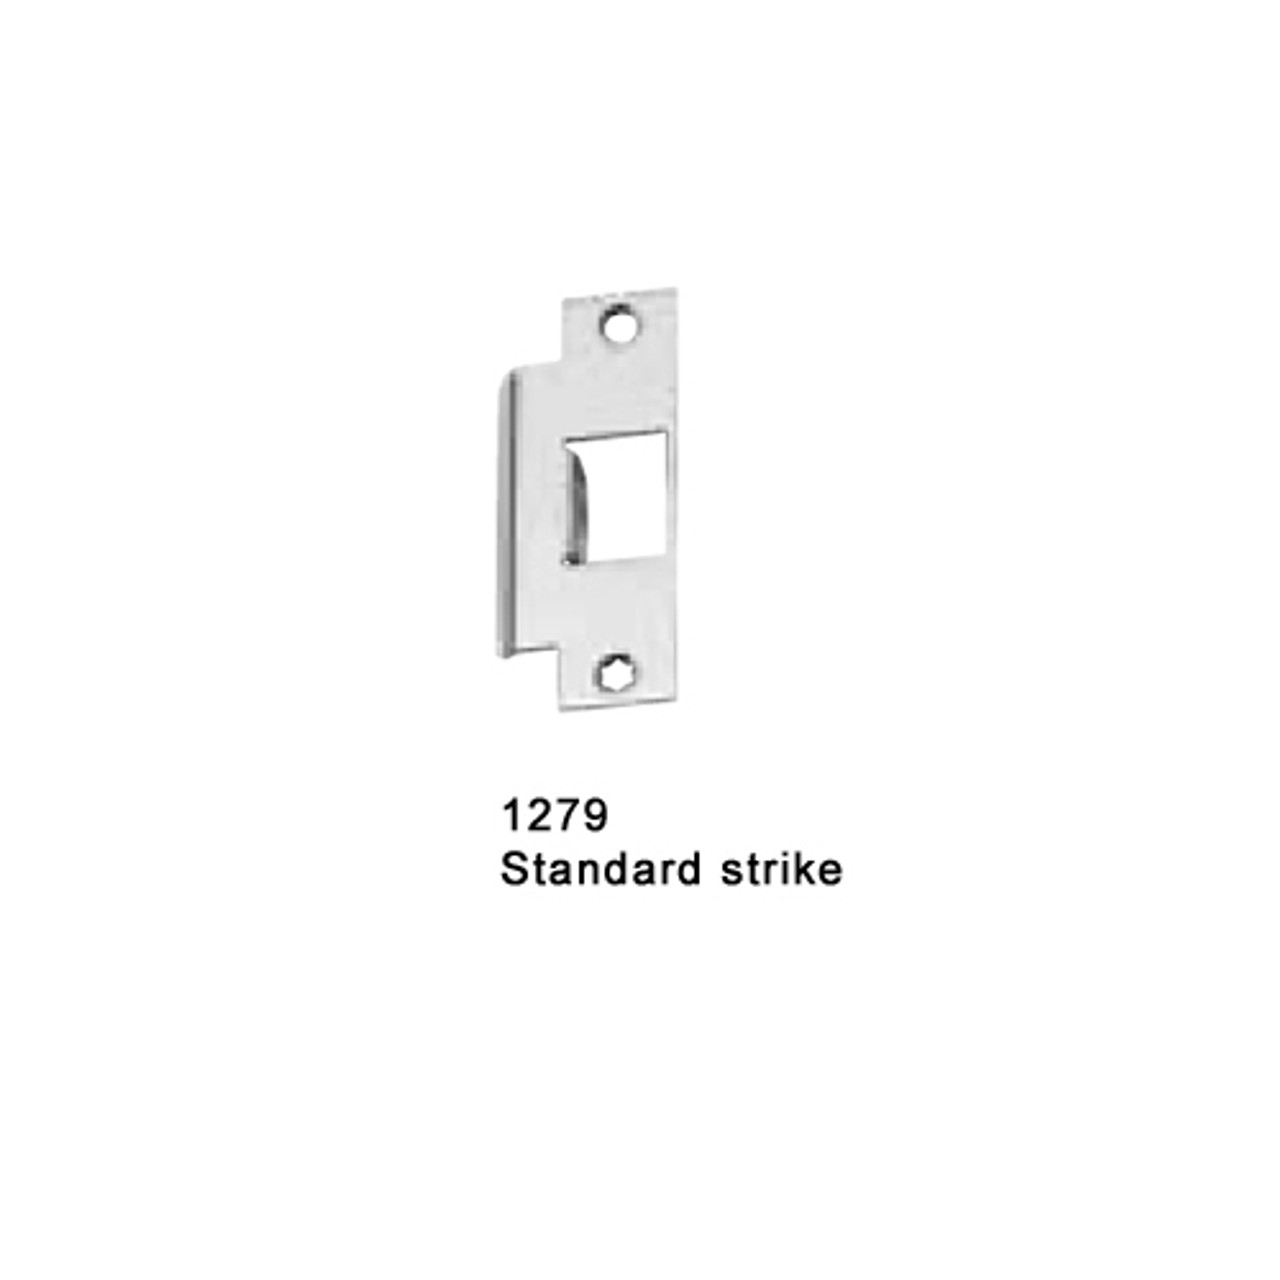 F-25-M-L-BE-Dane-US4-3-RHR Falcon 25 Series Fire Rated Mortise Lock Devices 510L-BE Dane Lever Trim with Blank Escutcheon in Satin Brass